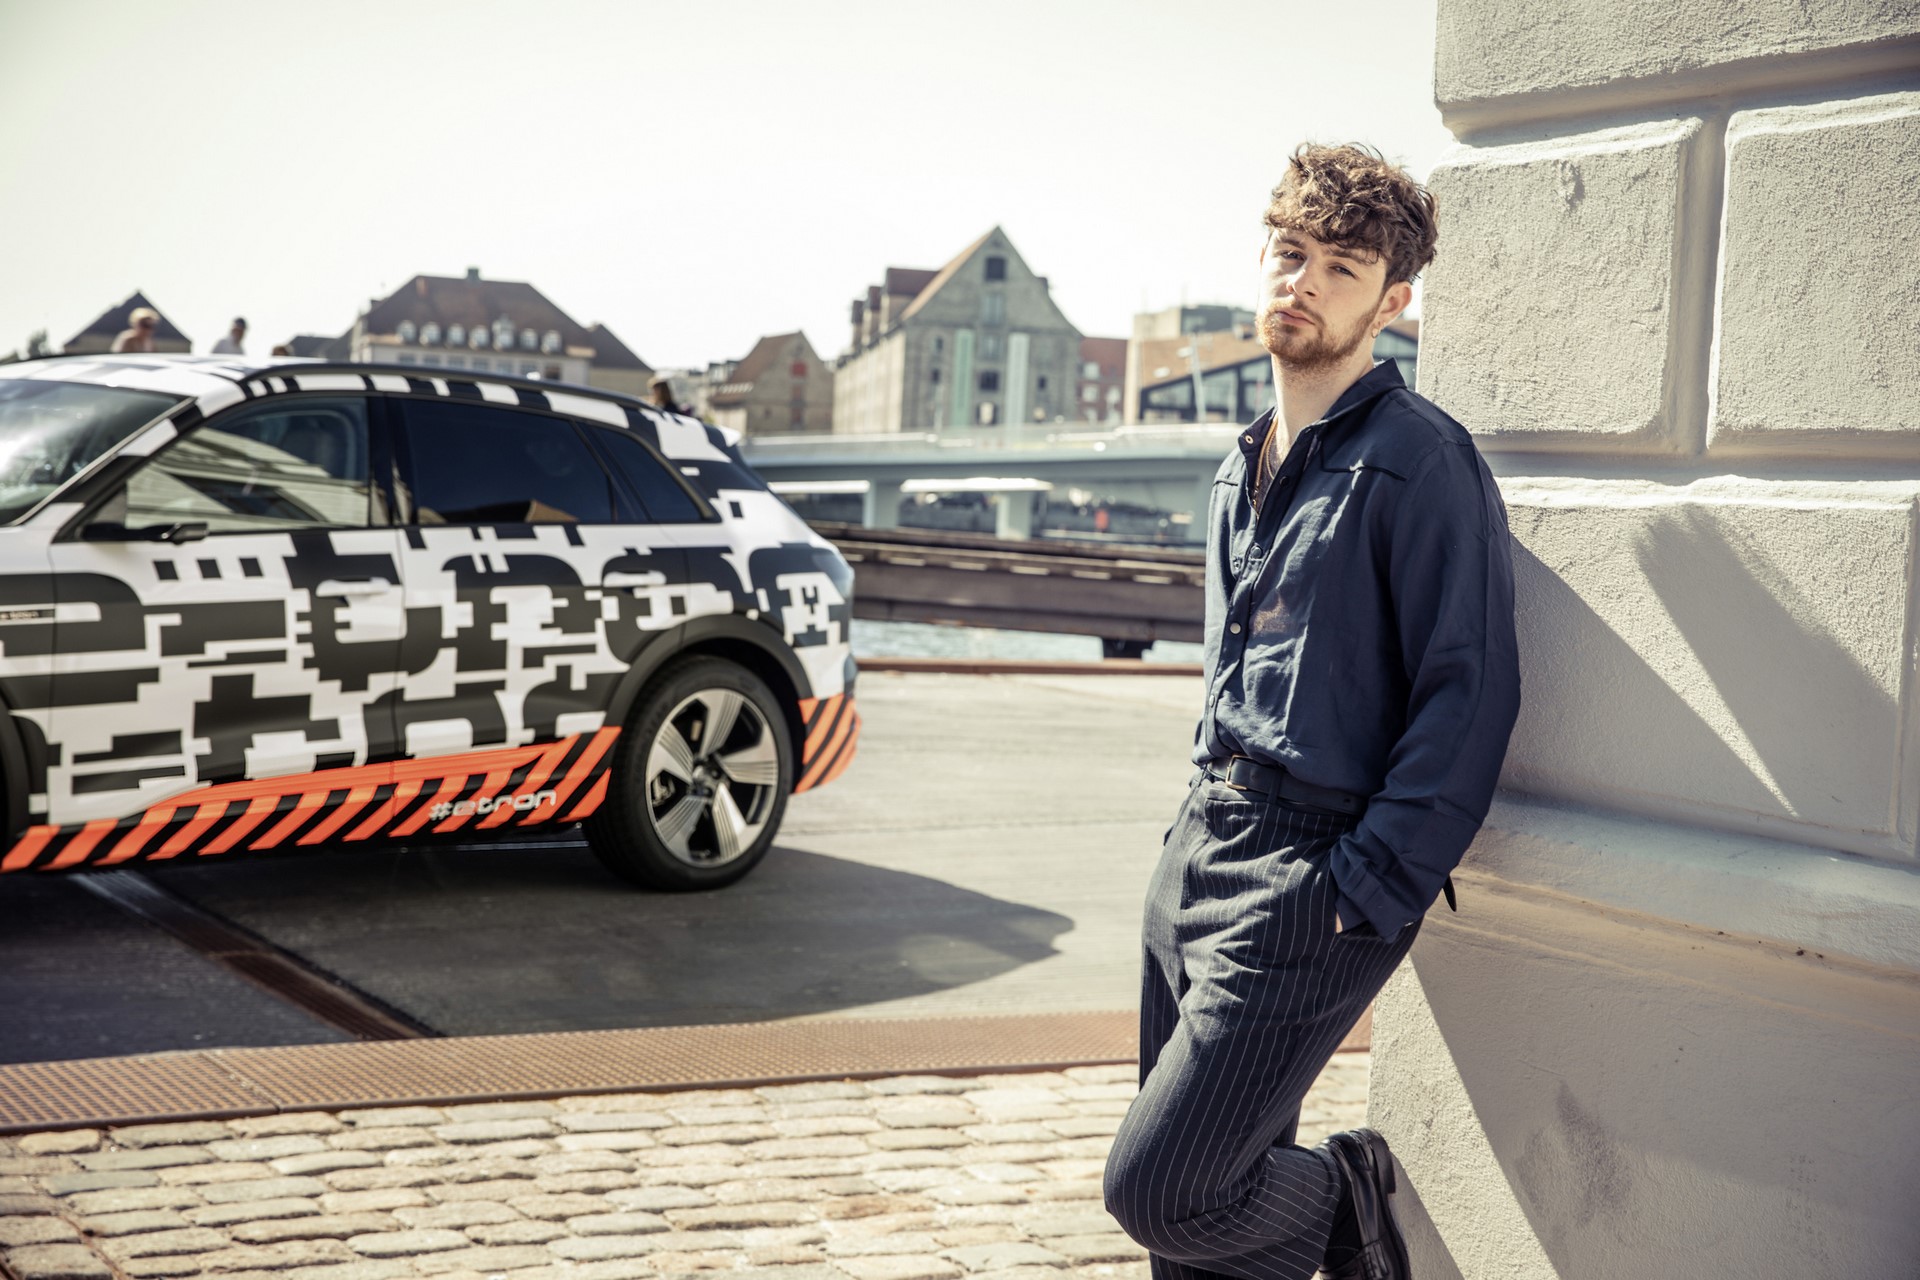 Tom Grennan, singer and songwriter, with the Audi e-tron prototype